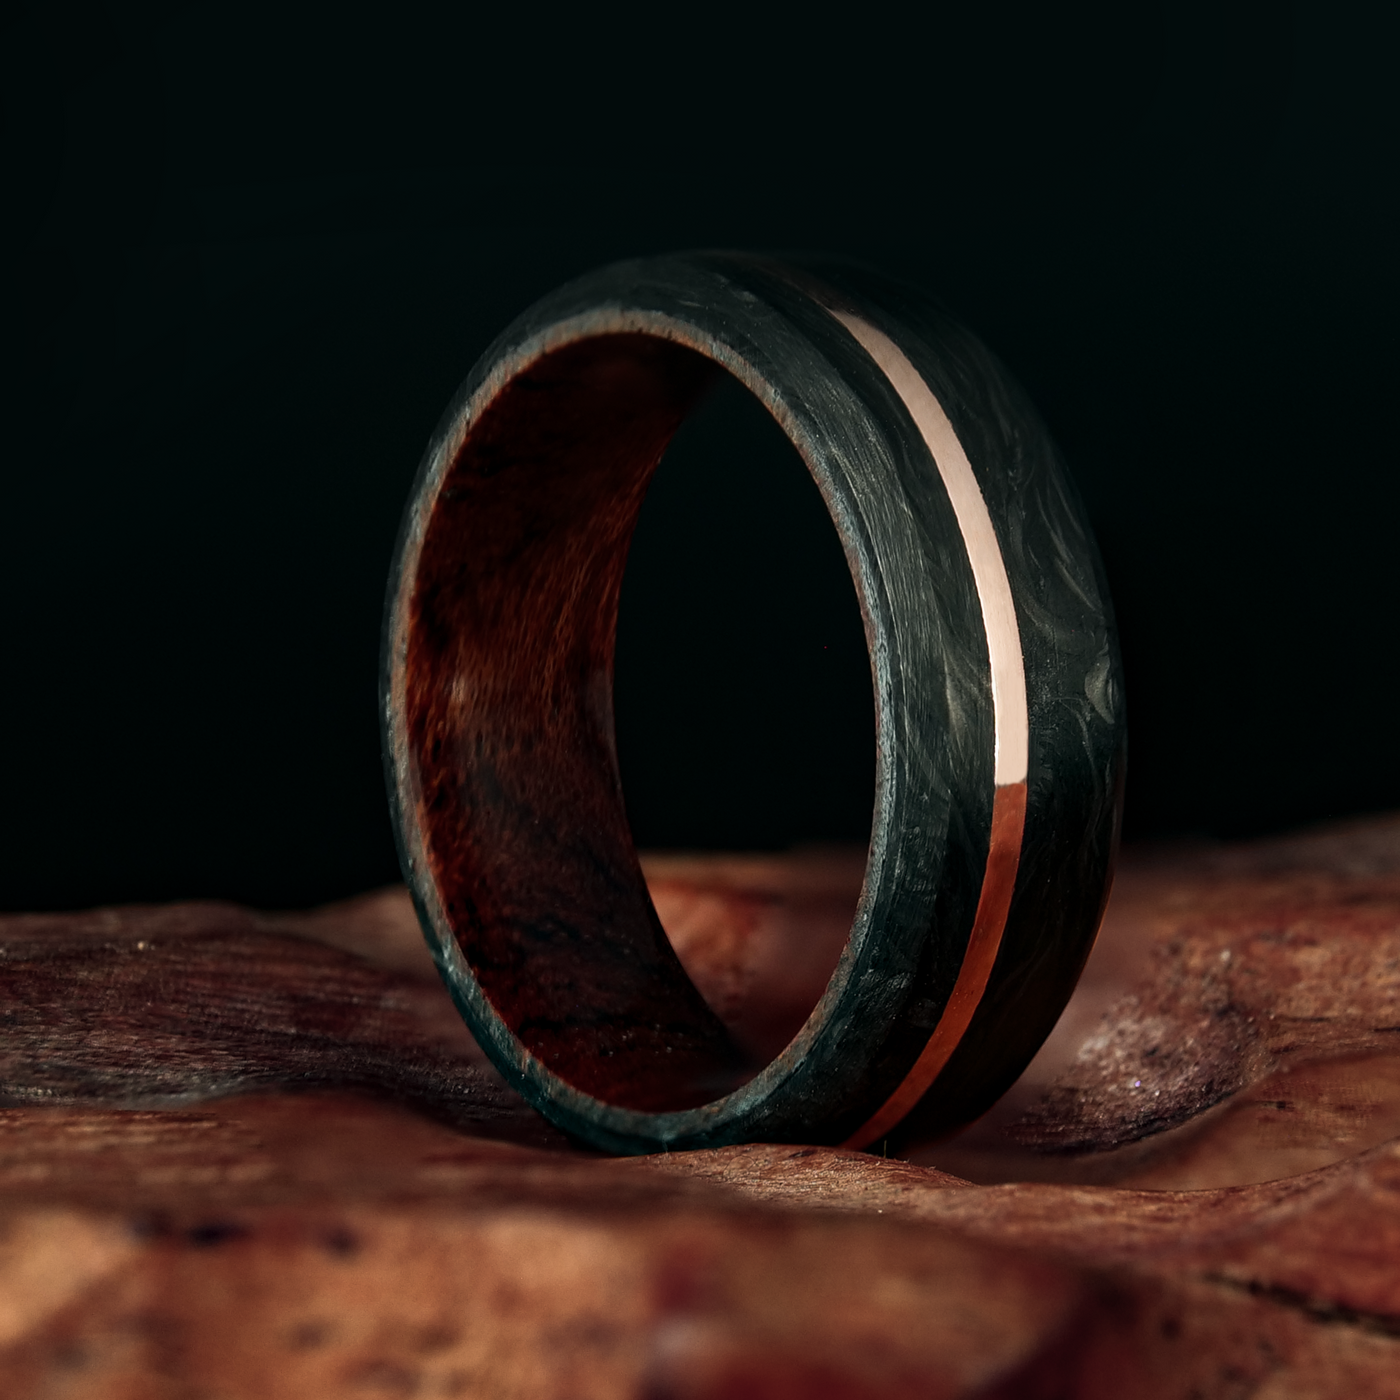 Forged Carbon Fiber and Gold Ring with Koa Wood Liner - Patrick Adair Designs